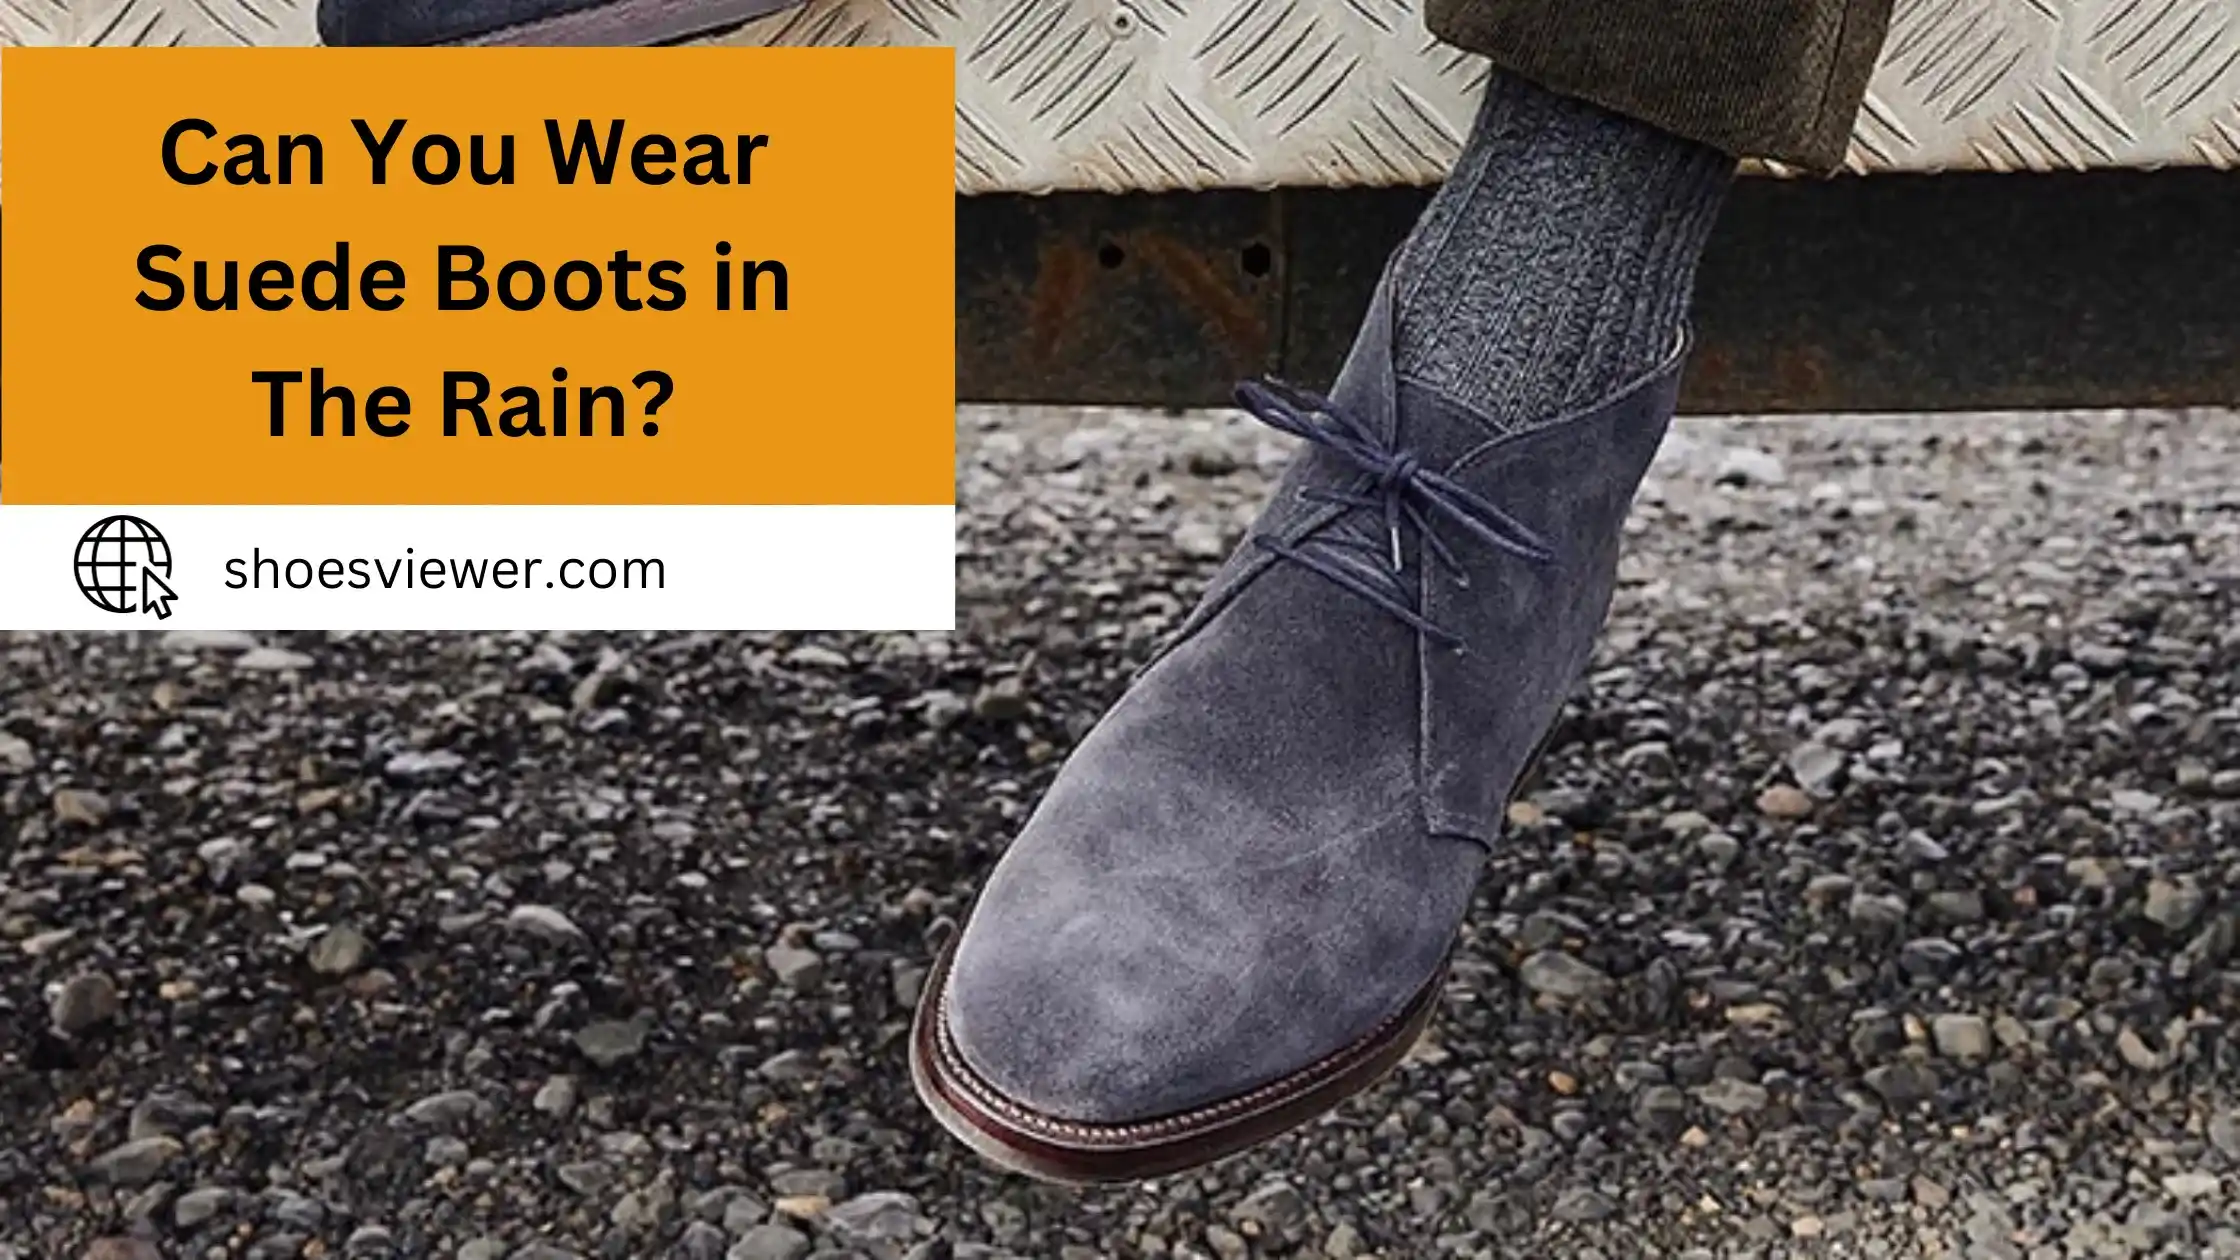 Can You Wear Suede Boots in The Rain? Detailed Information